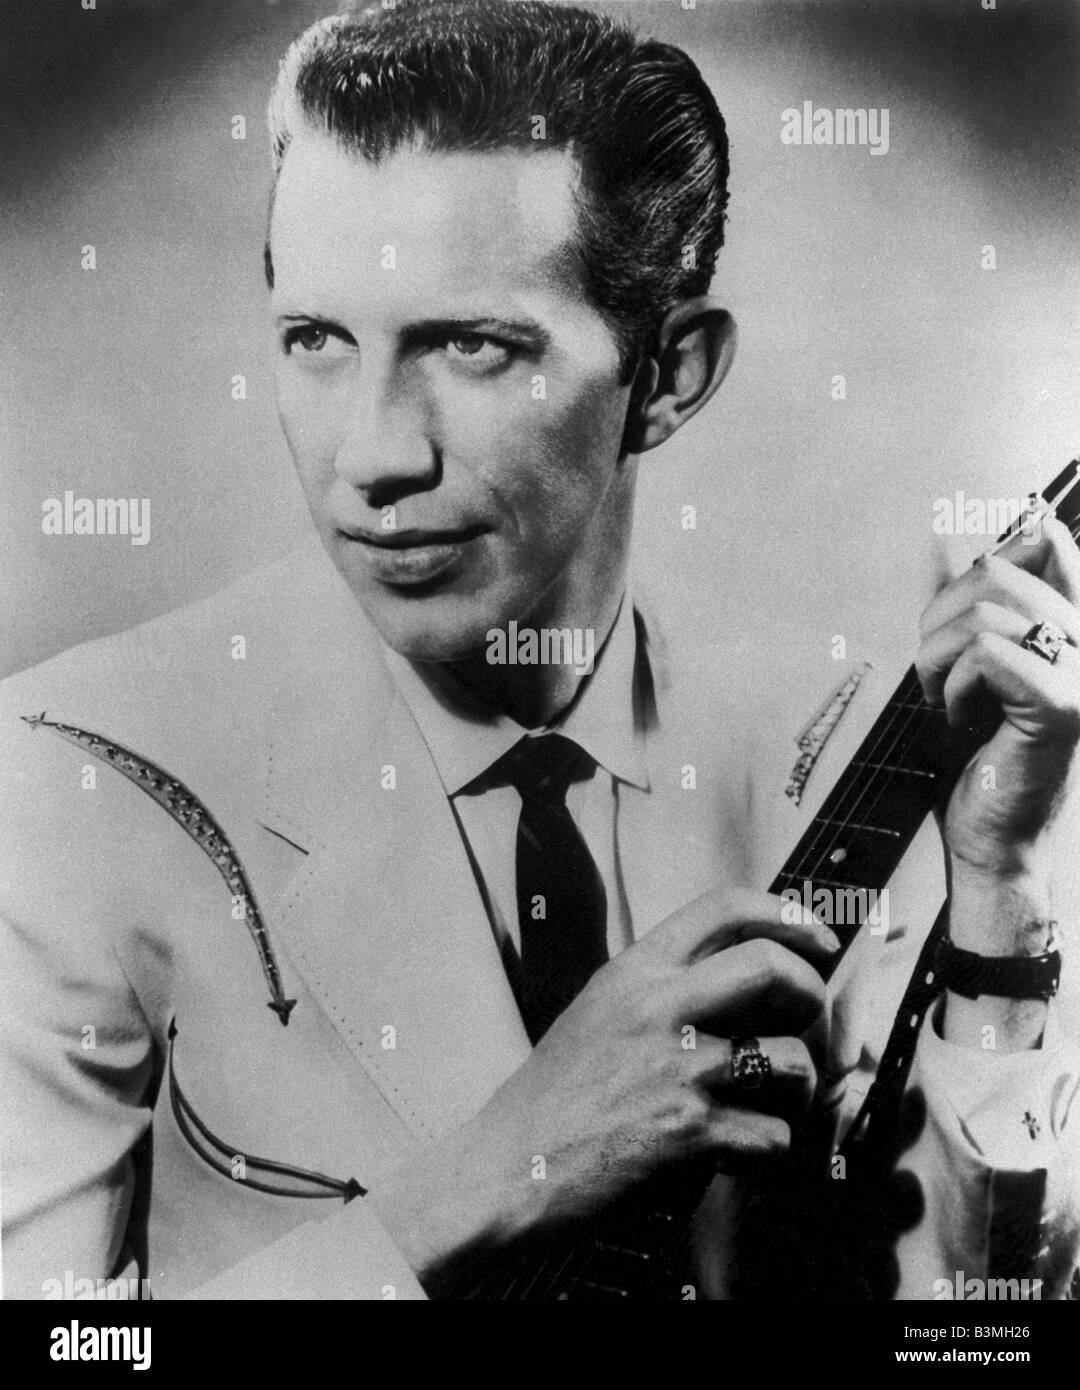 PORTER WAGONER   US Country & Western musician Stock Photo